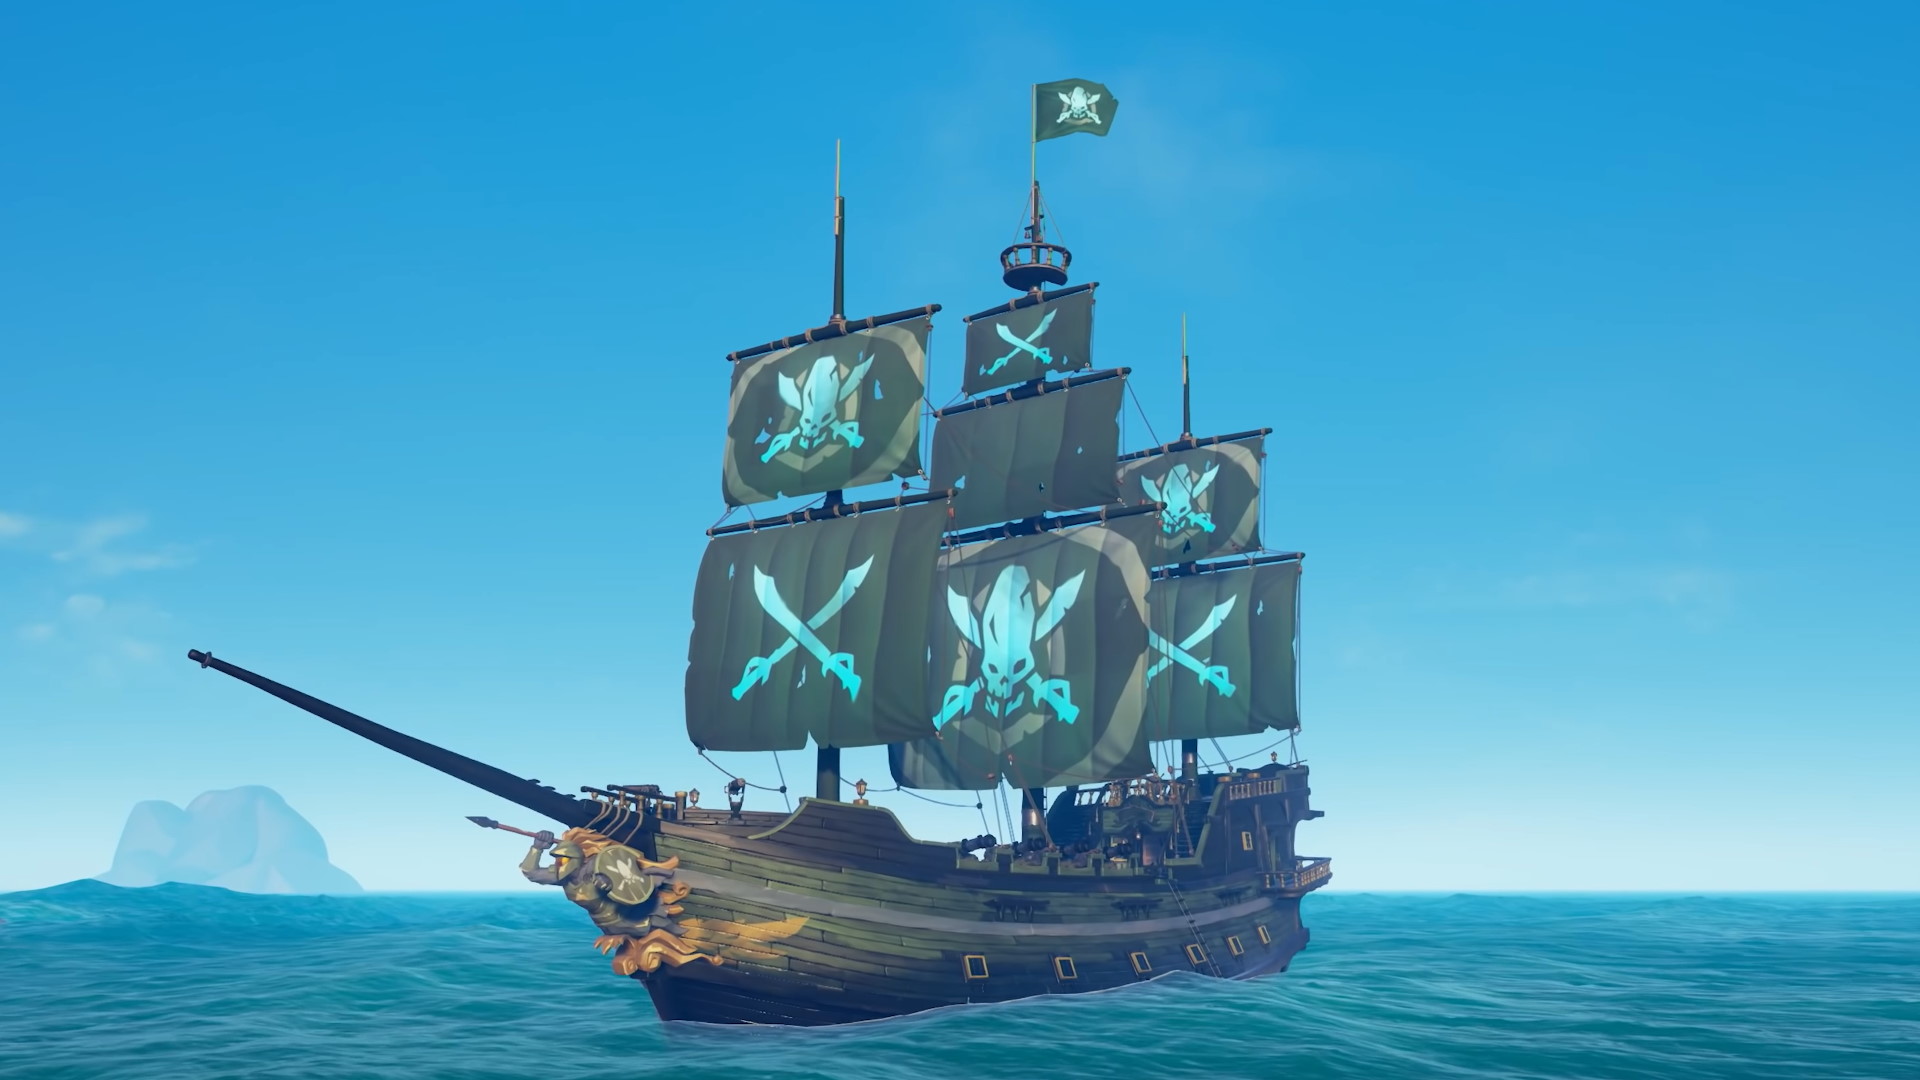 New Sea of Thieves Halo gear is coming for a limited time